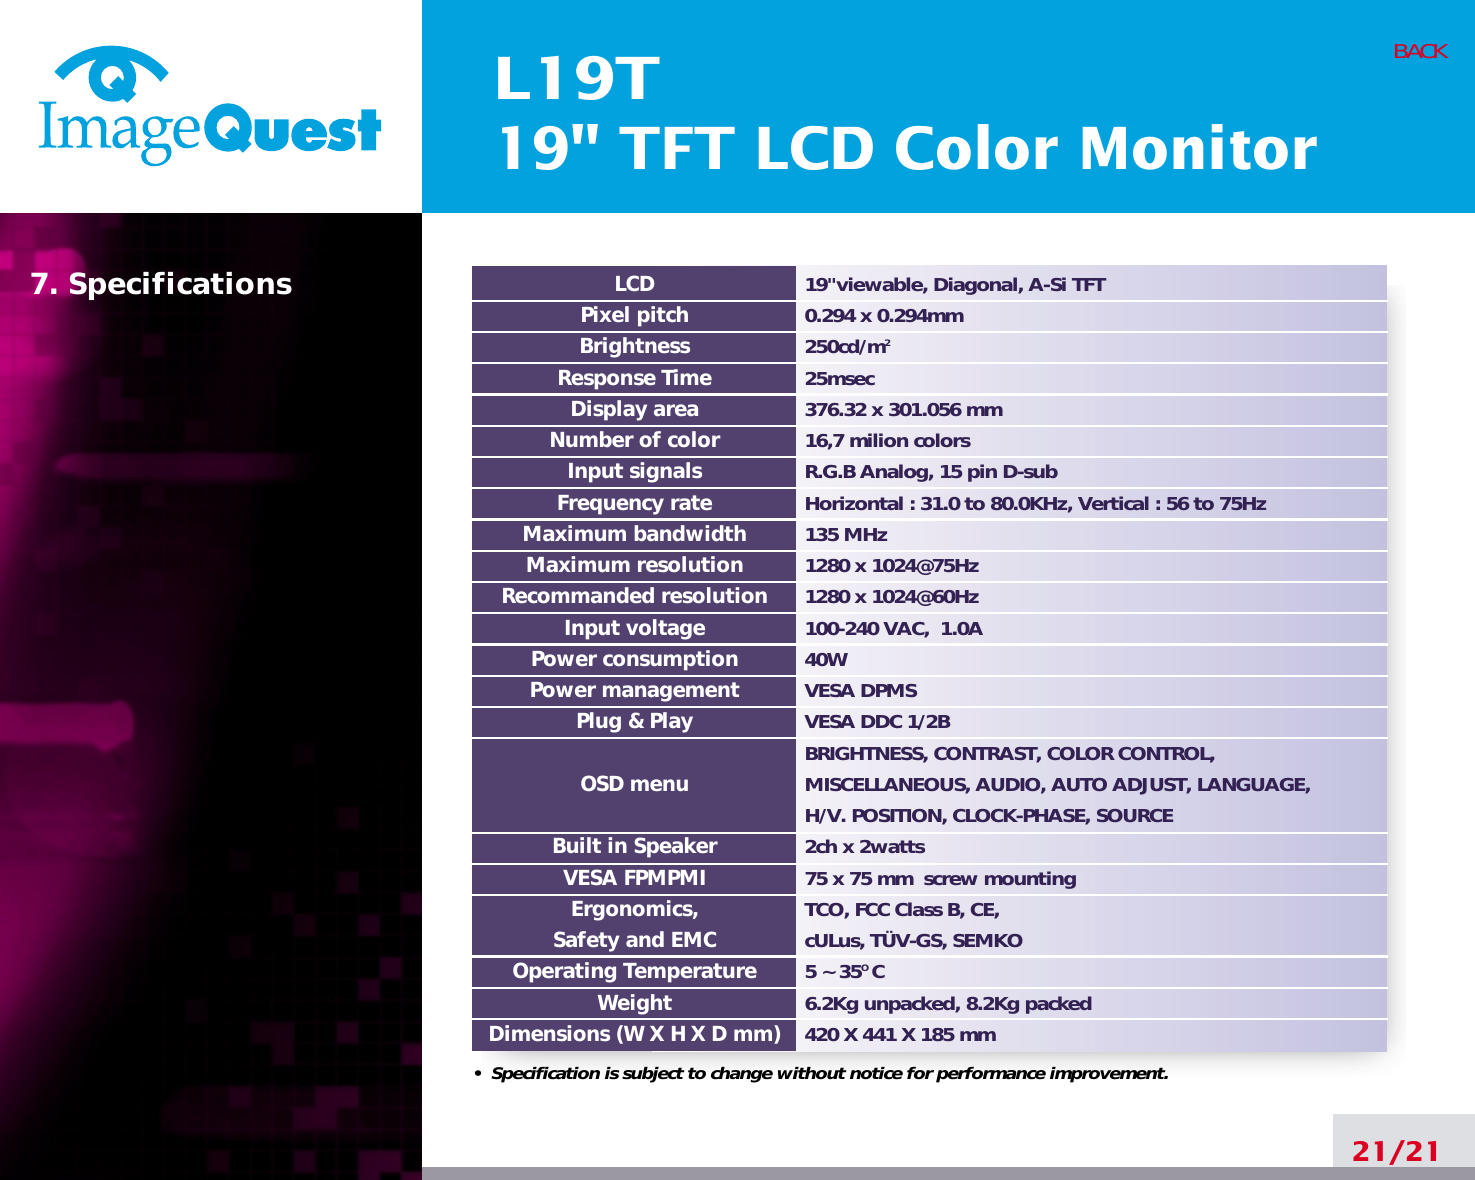 L19T19&quot; TFT LCD Color Monitor21/21BACK19&quot;viewable, Diagonal, A-Si TFT0.294 x 0.294mm250cd/m225msec376.32 x 301.056 mm16,7 milion colorsR.G.B Analog, 15 pin D-subHorizontal : 31.0 to 80.0KHz, Vertical : 56 to 75Hz135 MHz1280 x 1024@75Hz 1280 x 1024@60Hz100-240 VAC,  1.0A40WVESA DPMSVESA DDC 1/2BBRIGHTNESS, CONTRAST, COLOR CONTROL,MISCELLANEOUS, AUDIO, AUTO ADJUST, LANGUAGE,H/V. POSITION, CLOCK-PHASE, SOURCE2ch x 2watts75 x 75 mm  screw mountingTCO, FCC Class B, CE, cULus, TÜV-GS, SEMKO5 ~ 35O C6.2Kg unpacked, 8.2Kg packed420 X 441 X 185 mmLCDPixel pitchBrightnessResponse TimeDisplay areaNumber of colorInput signalsFrequency rateMaximum bandwidthMaximum resolutionRecommanded resolutionInput voltagePower consumptionPower managementPlug &amp; PlayOSD menuBuilt in SpeakerVESA FPMPMIErgonomics,Safety and EMCOperating TemperatureWeightDimensions (W X H X D mm)•  Specification is subject to change without notice for performance improvement.7. Specifications